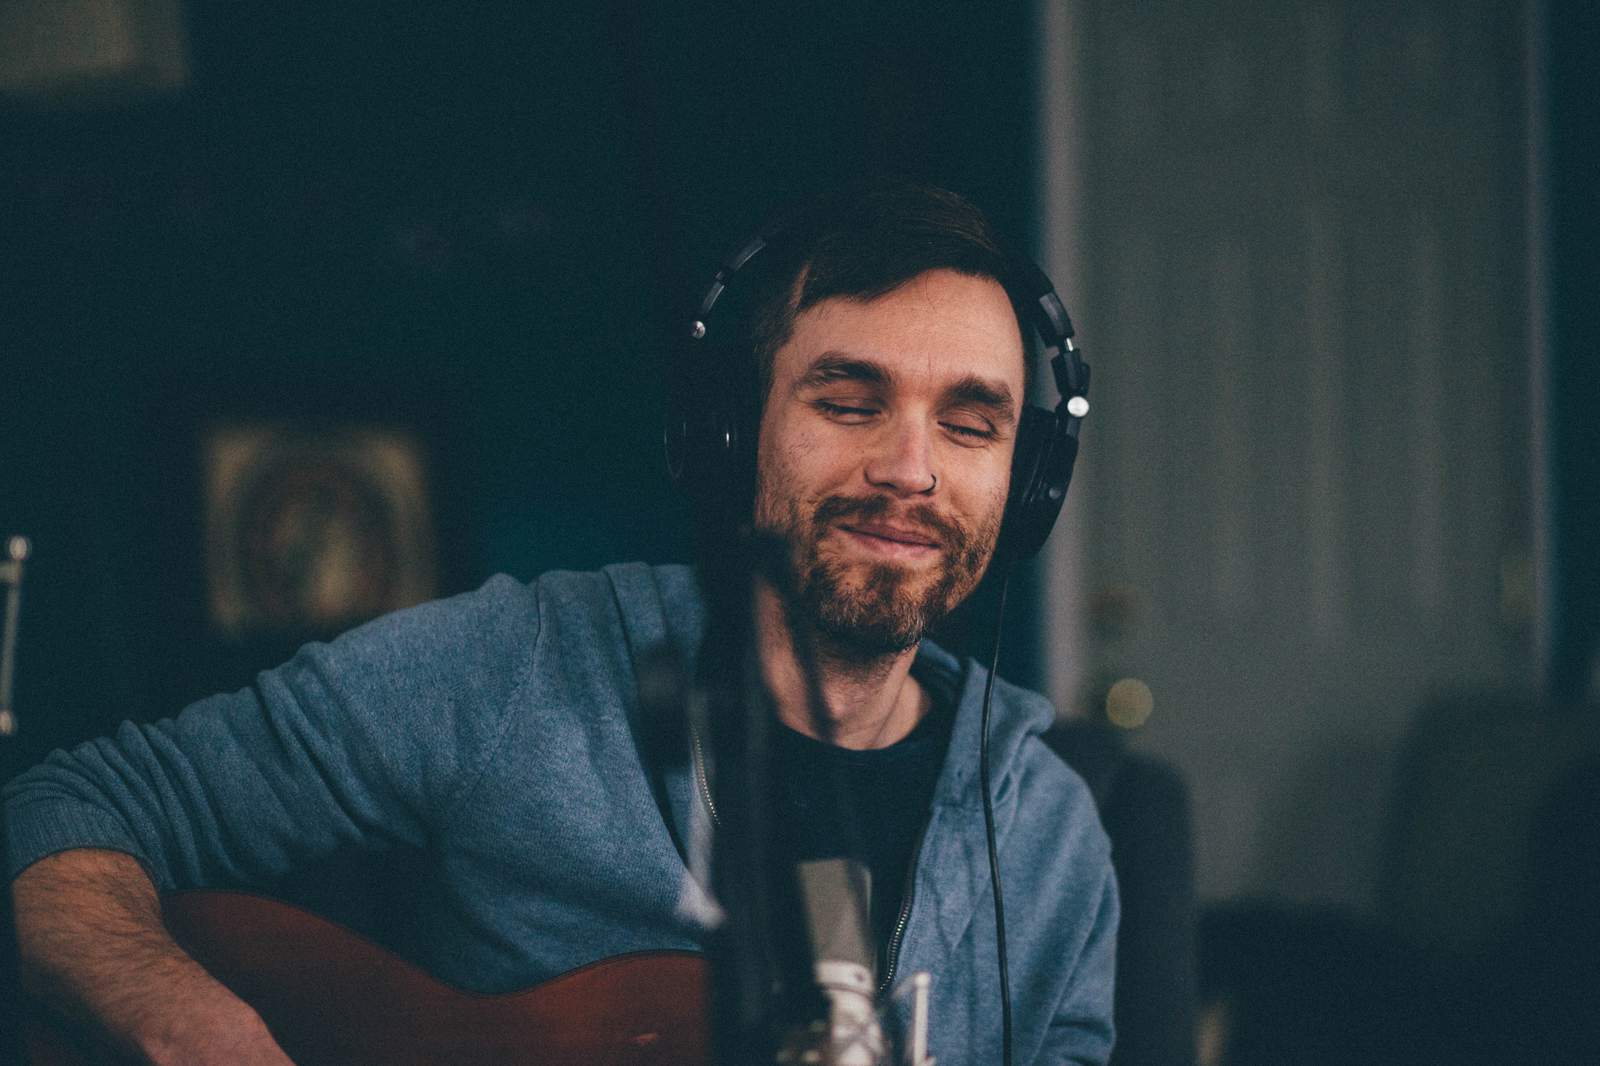 Ann Arbor area songwriter creates, releases new music amid pandemic